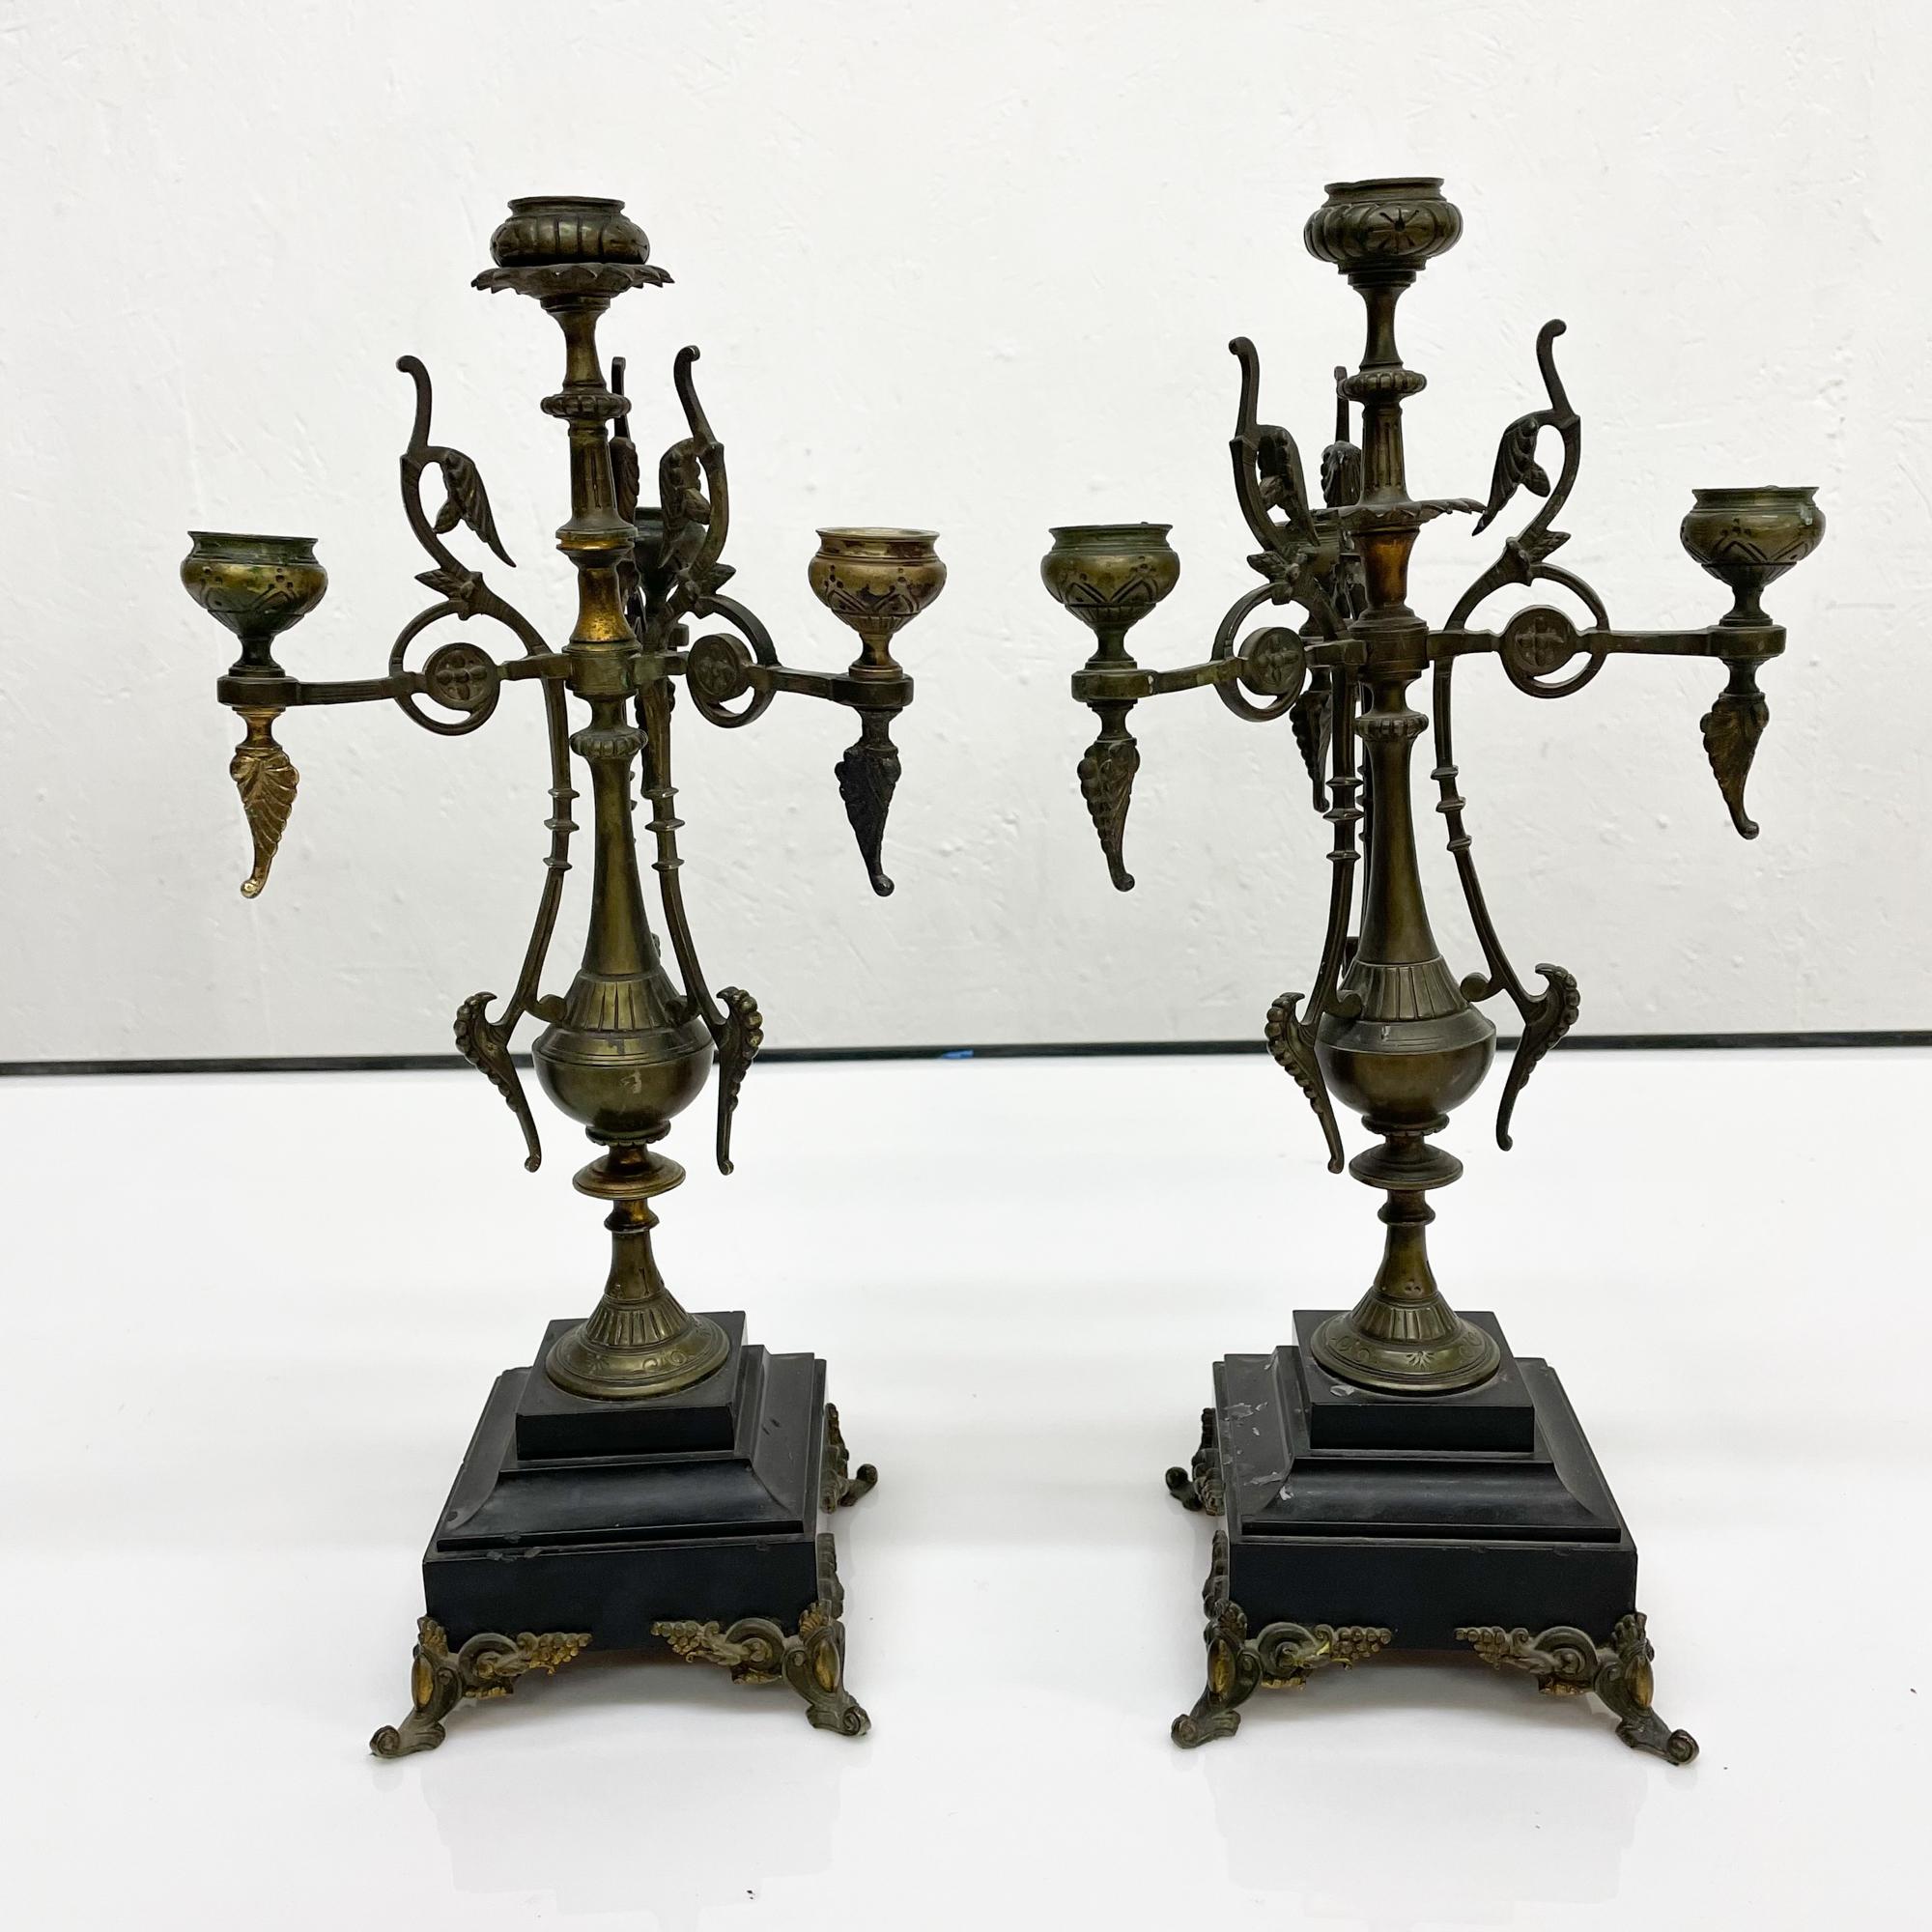 Neoclassical French Empire Pair Sophisticated Candelabra Bronze on Belgium Black Marble 1800s